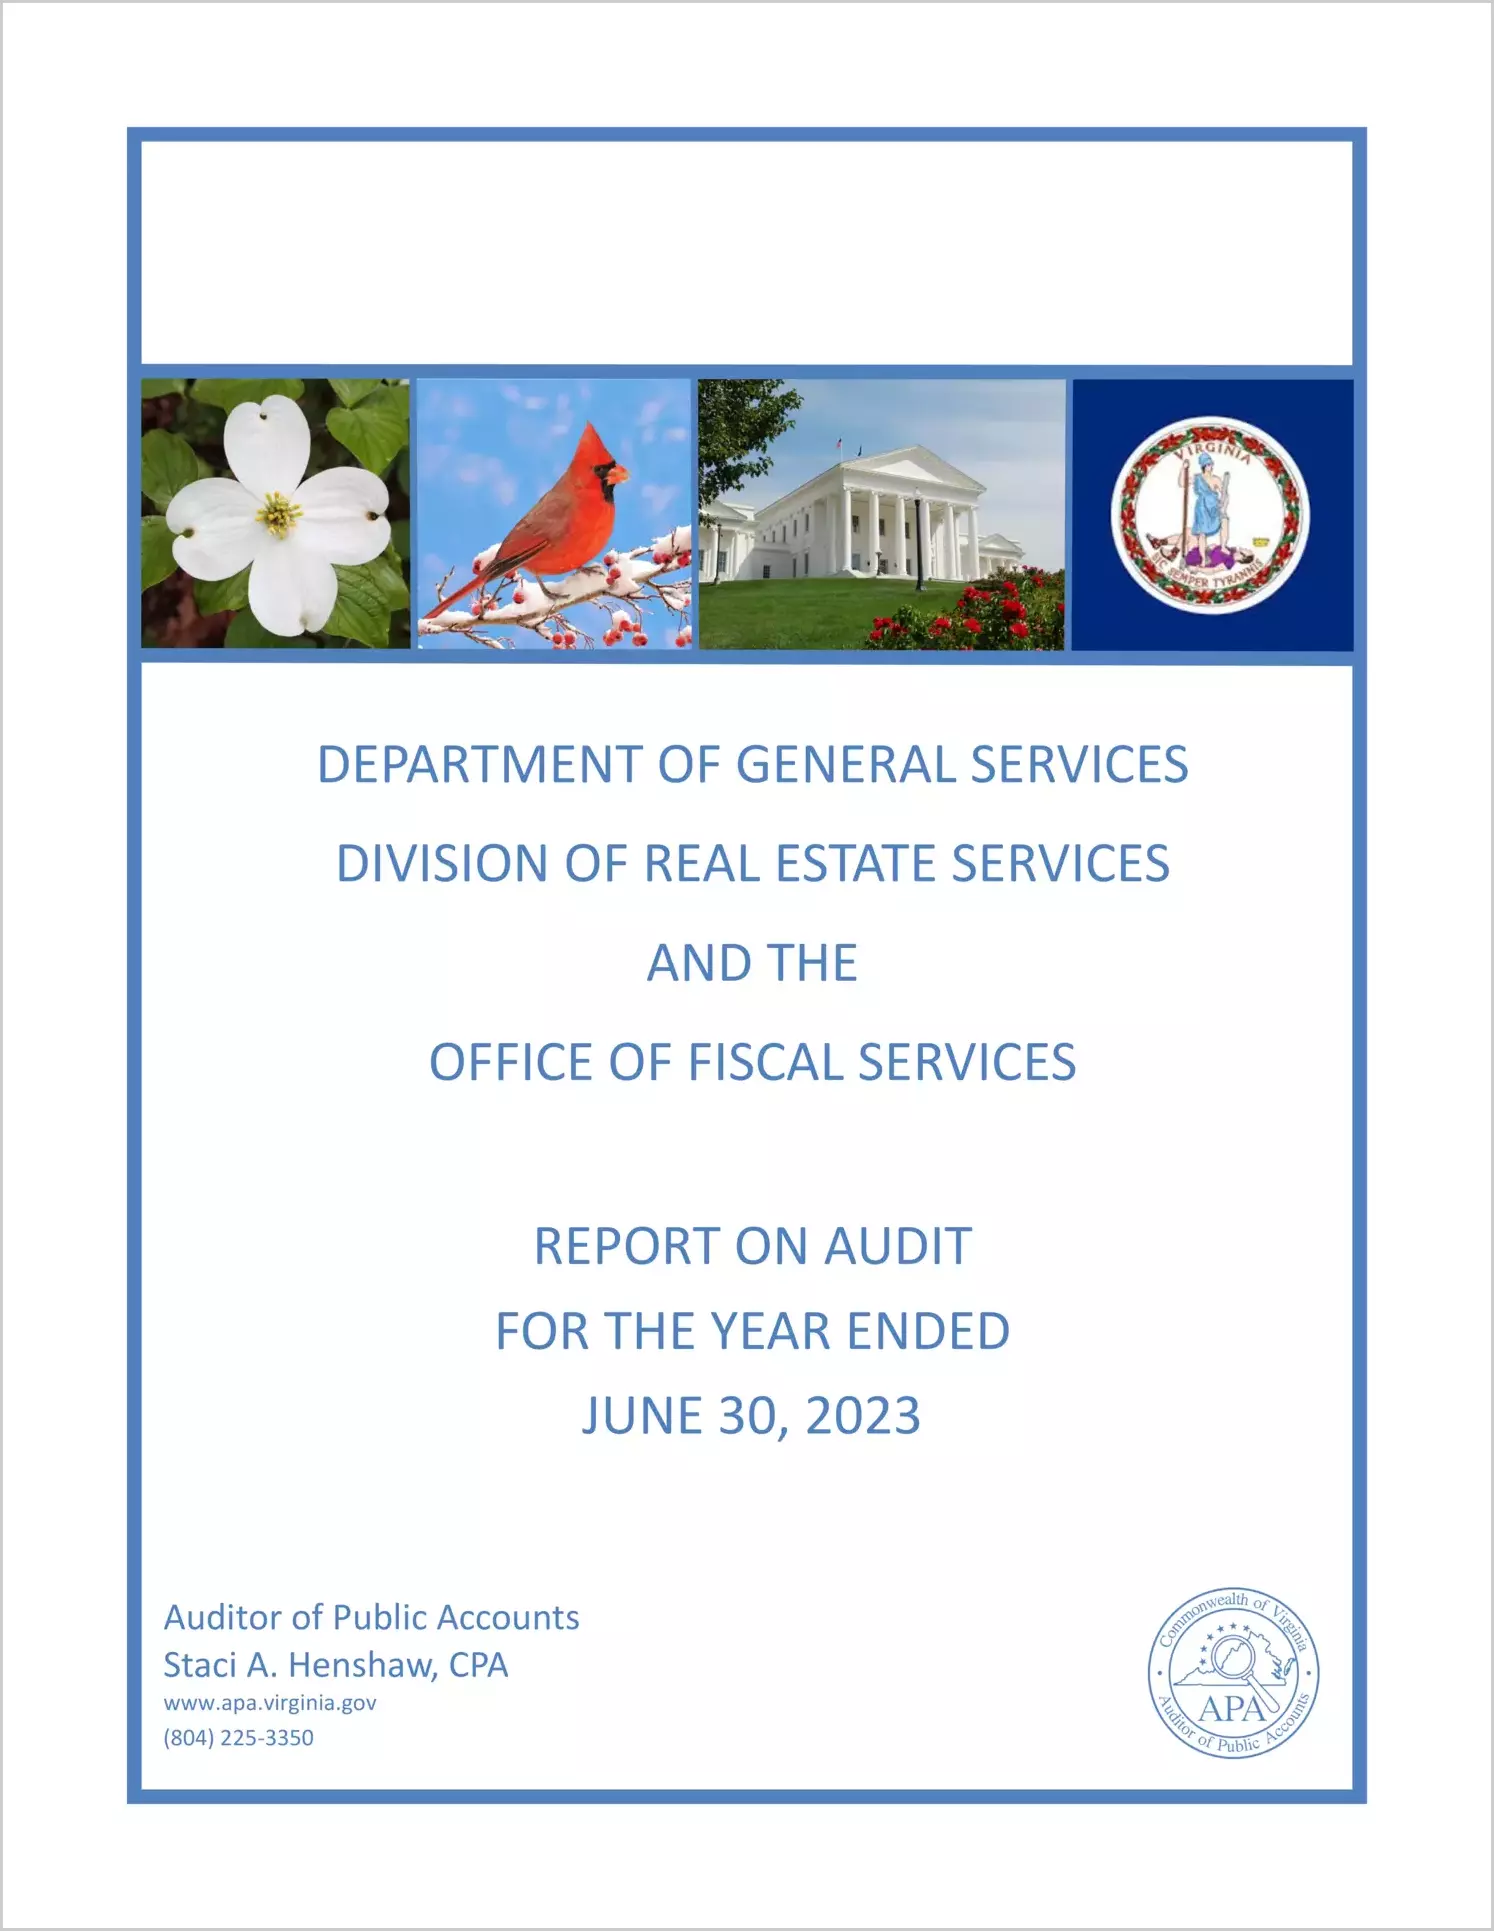 Department of General Services’ Division of Real Estate Services and the Office of Fiscal Services for the year ended June 30, 2023